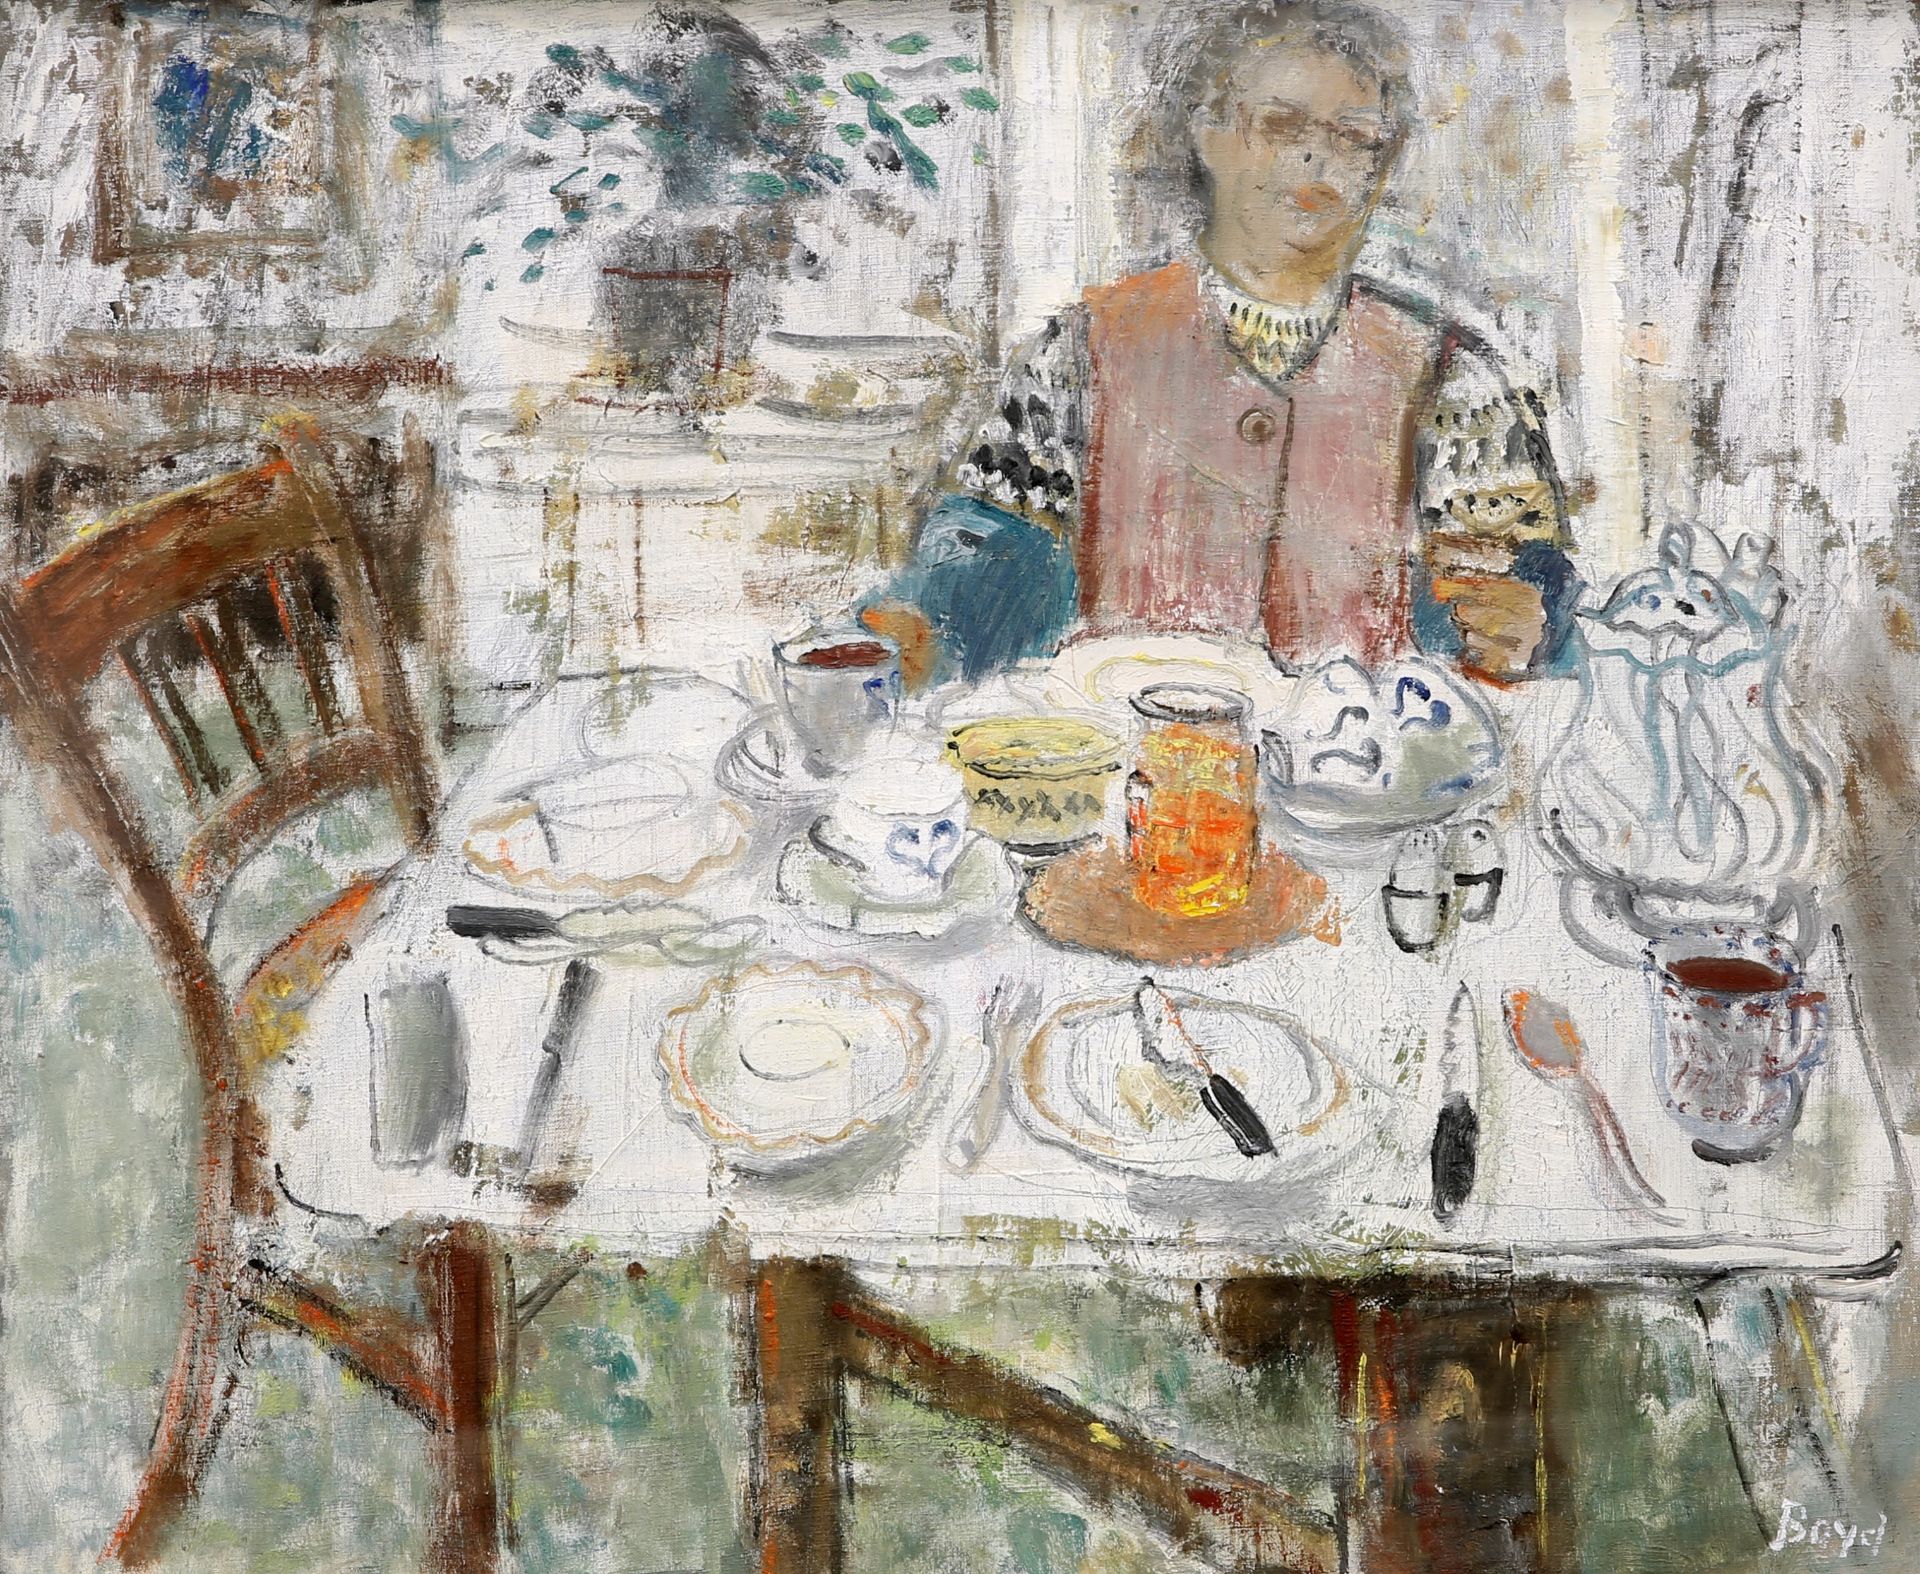 JOHN G. BOYD (SCOTTISH, 1940-2001), "BREAKFAST TIME", signed lower right, The Contemporary Fine